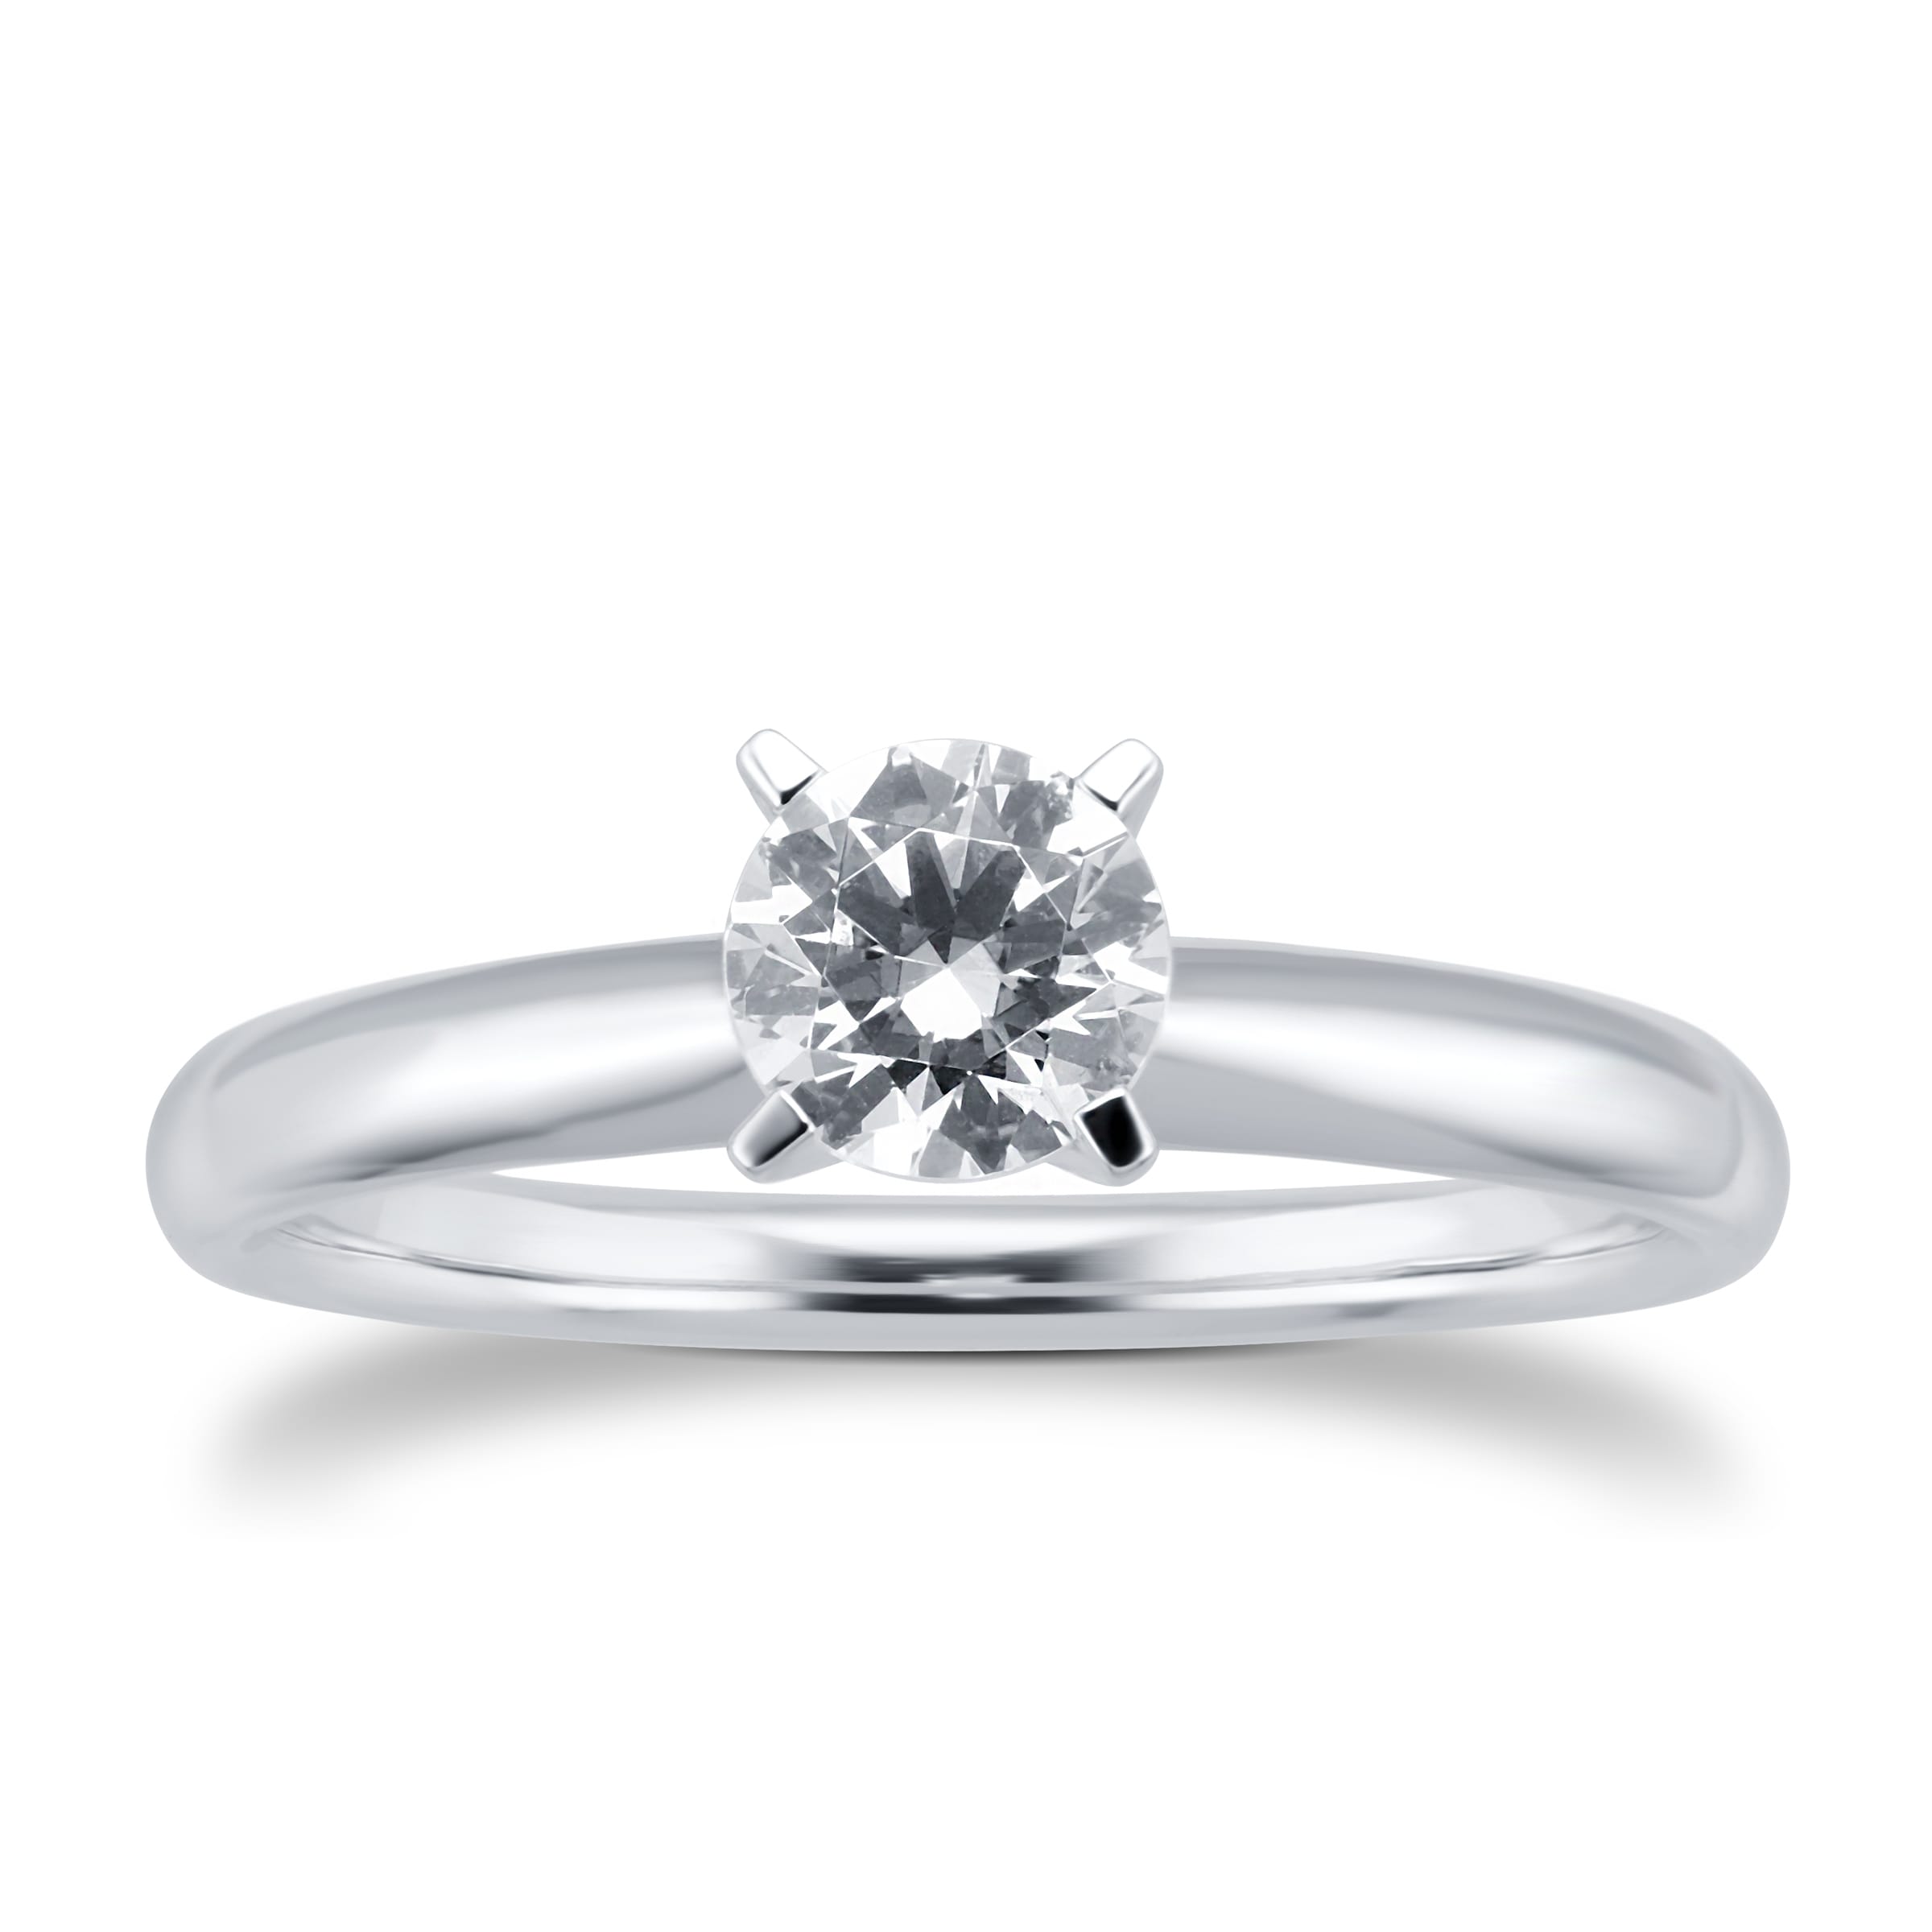 18ct White Gold 0.72ct Diamond Solitaire Ring